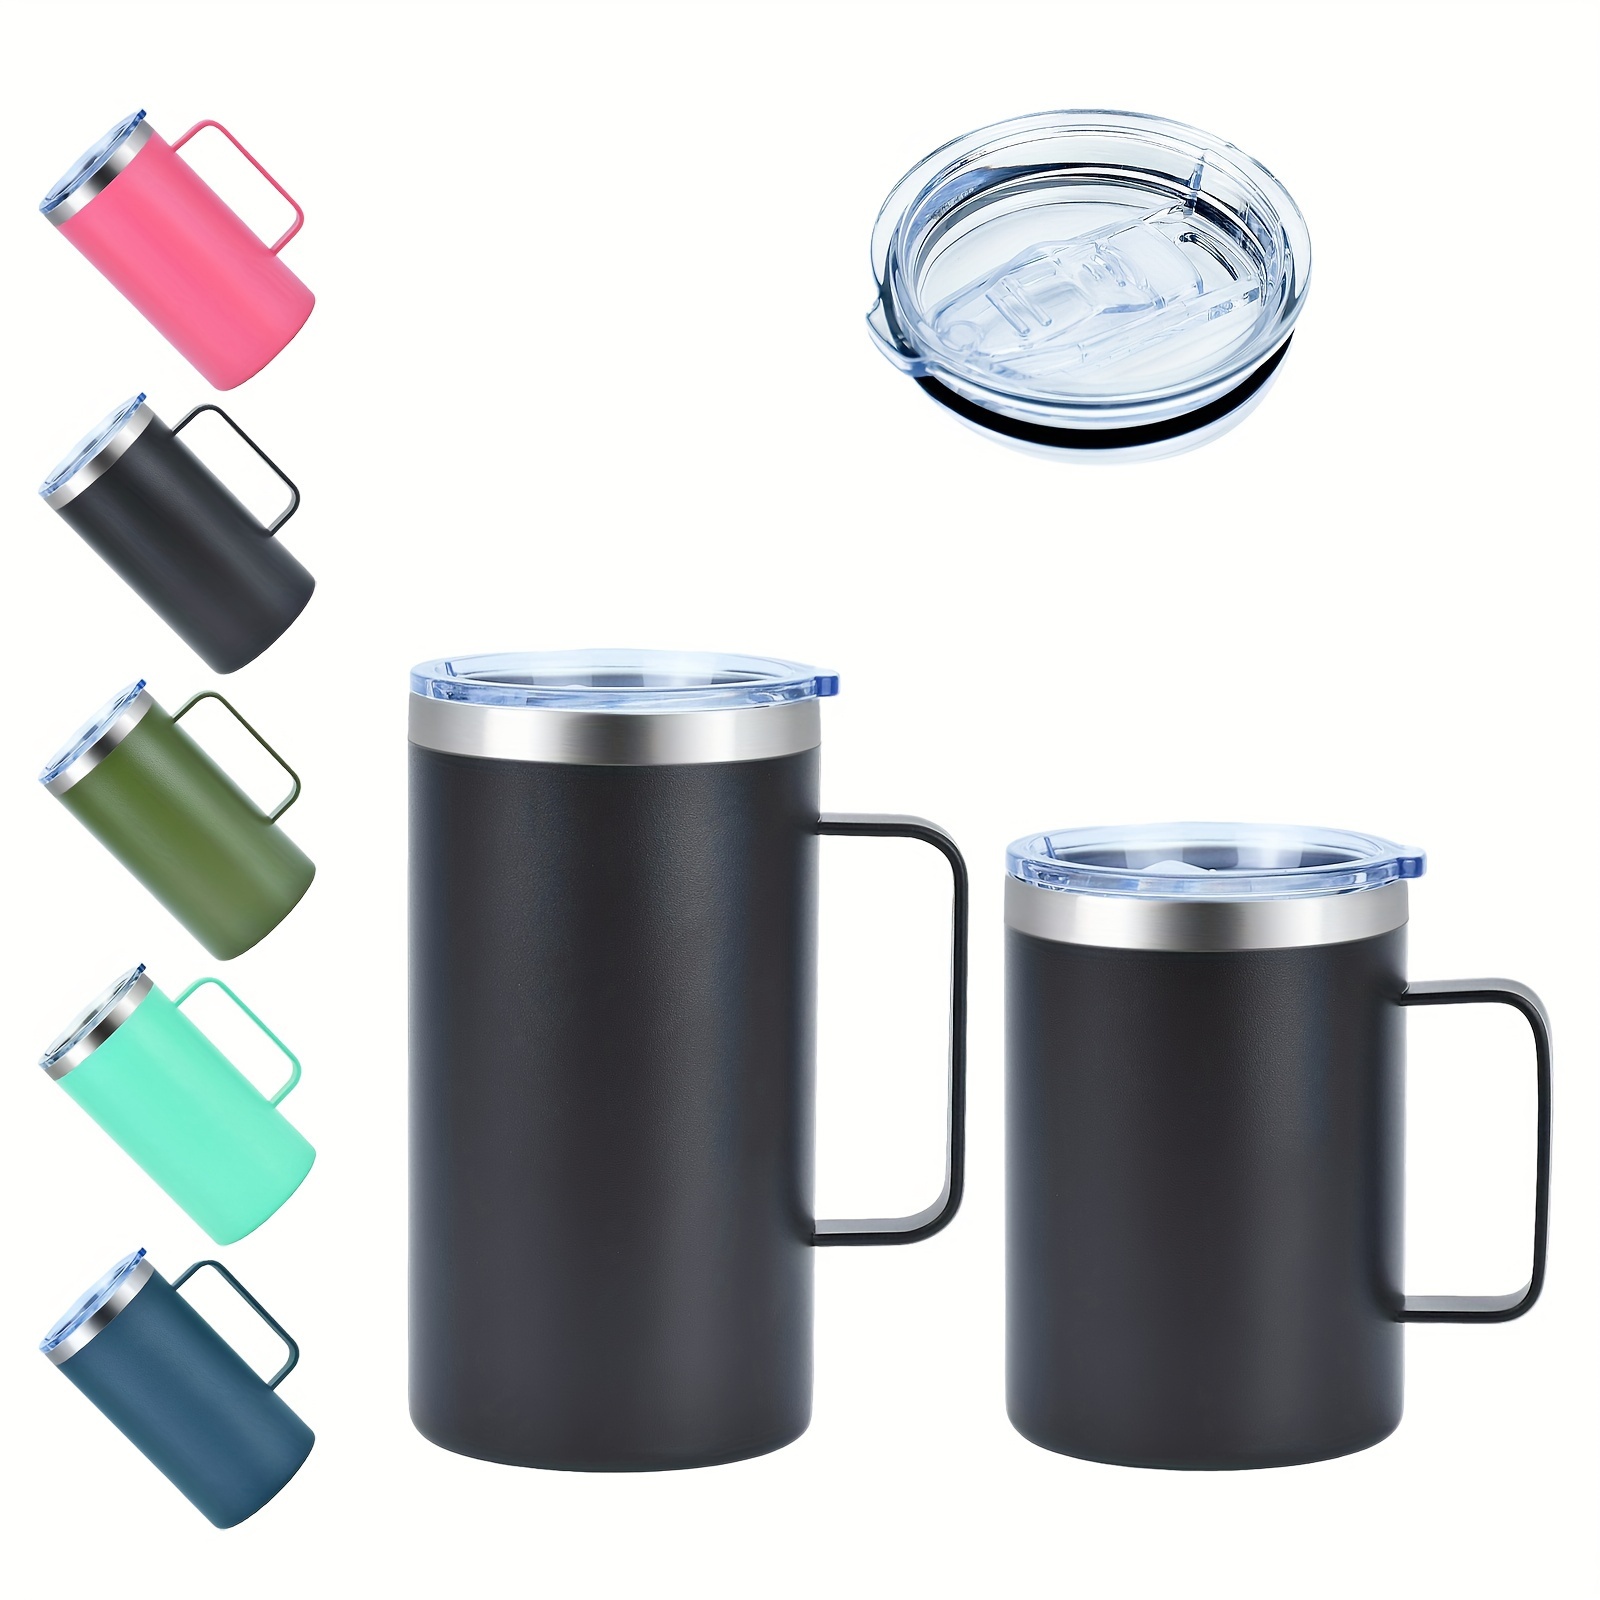  Portable French Press Travel Mug (15oz) - Stainless Steel &  Double Wall Vacuum Army Green Coffee Maker – Single Serve French Press for  Travel, Home, Office, & More -No Leak Coffee